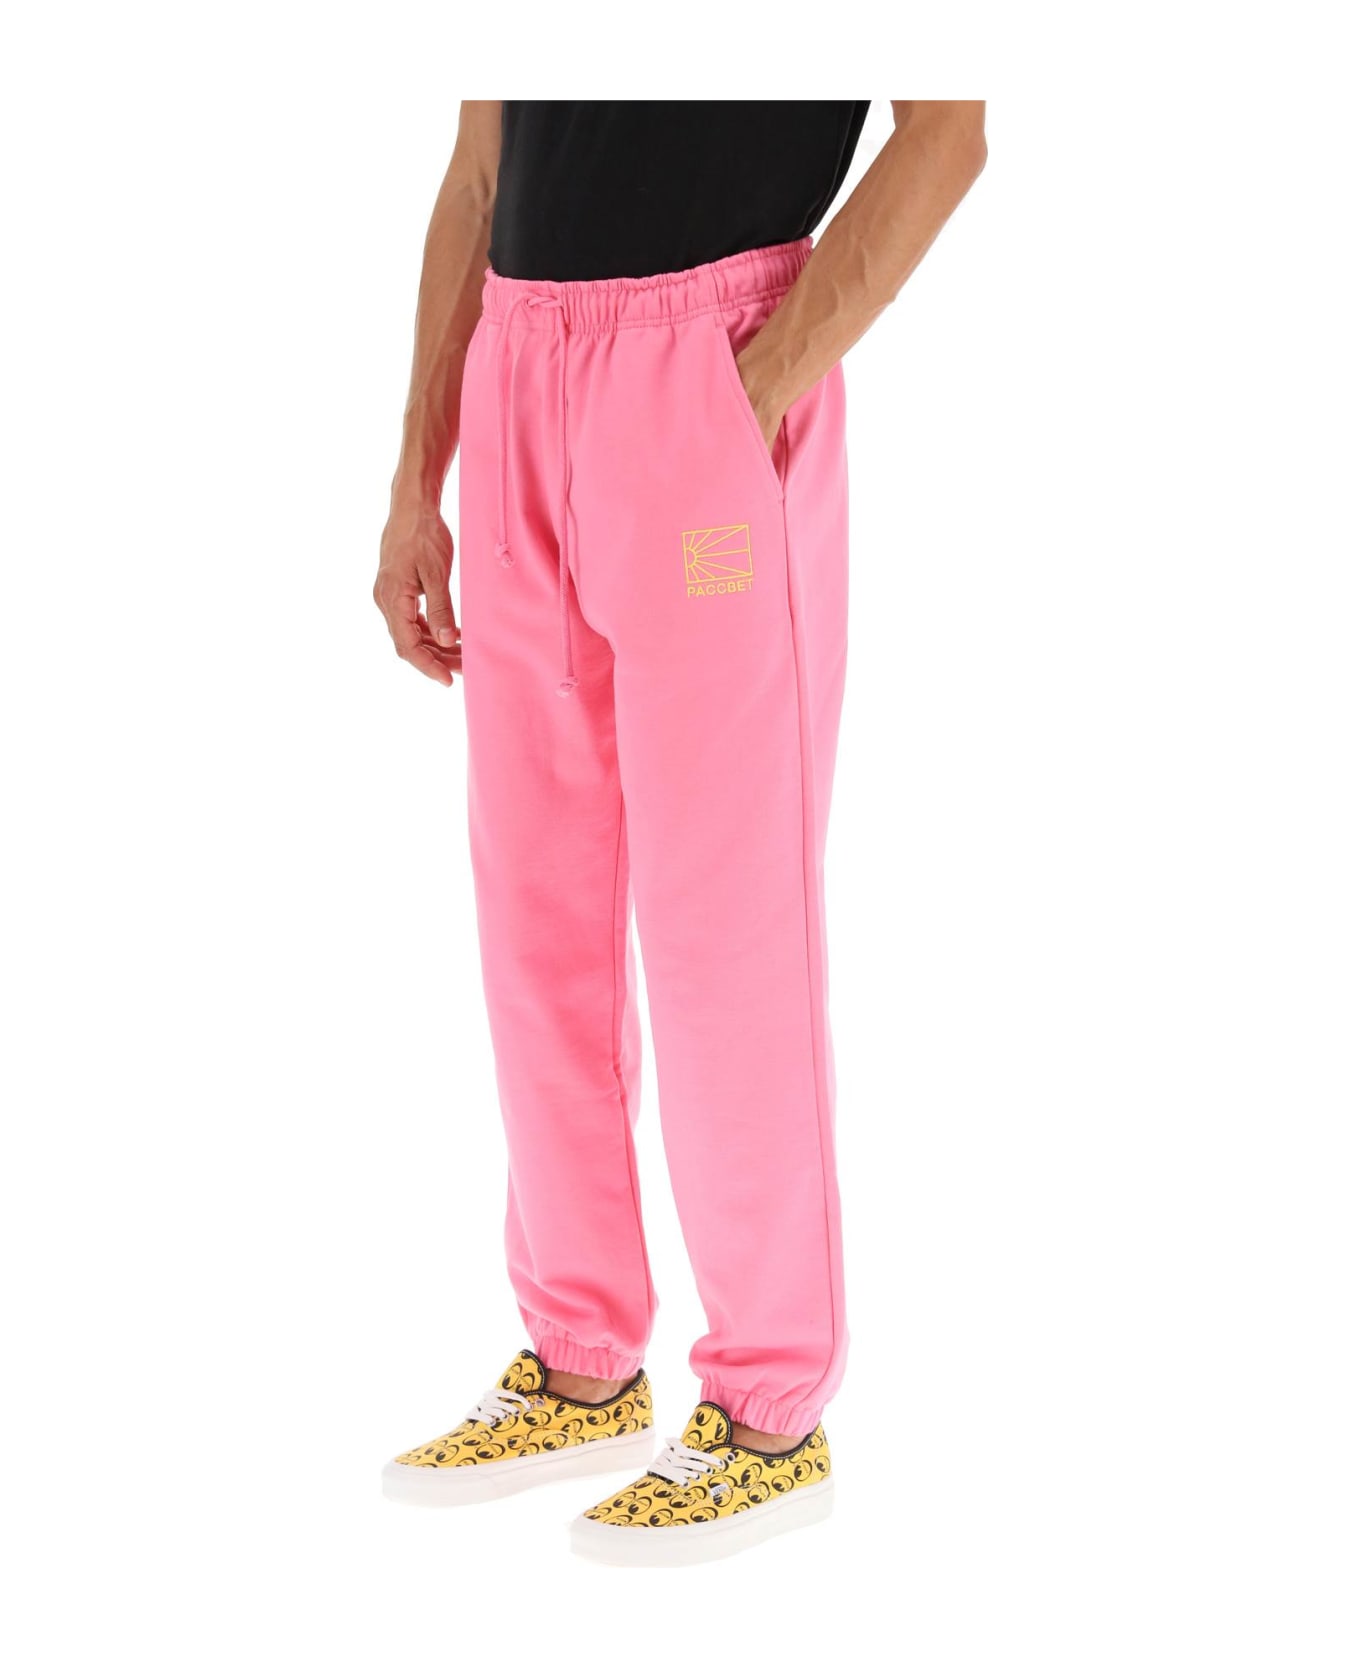 PACCBET Logo Embroidery Jogger Pants - PINK 4 (Pink) スウェットパンツ